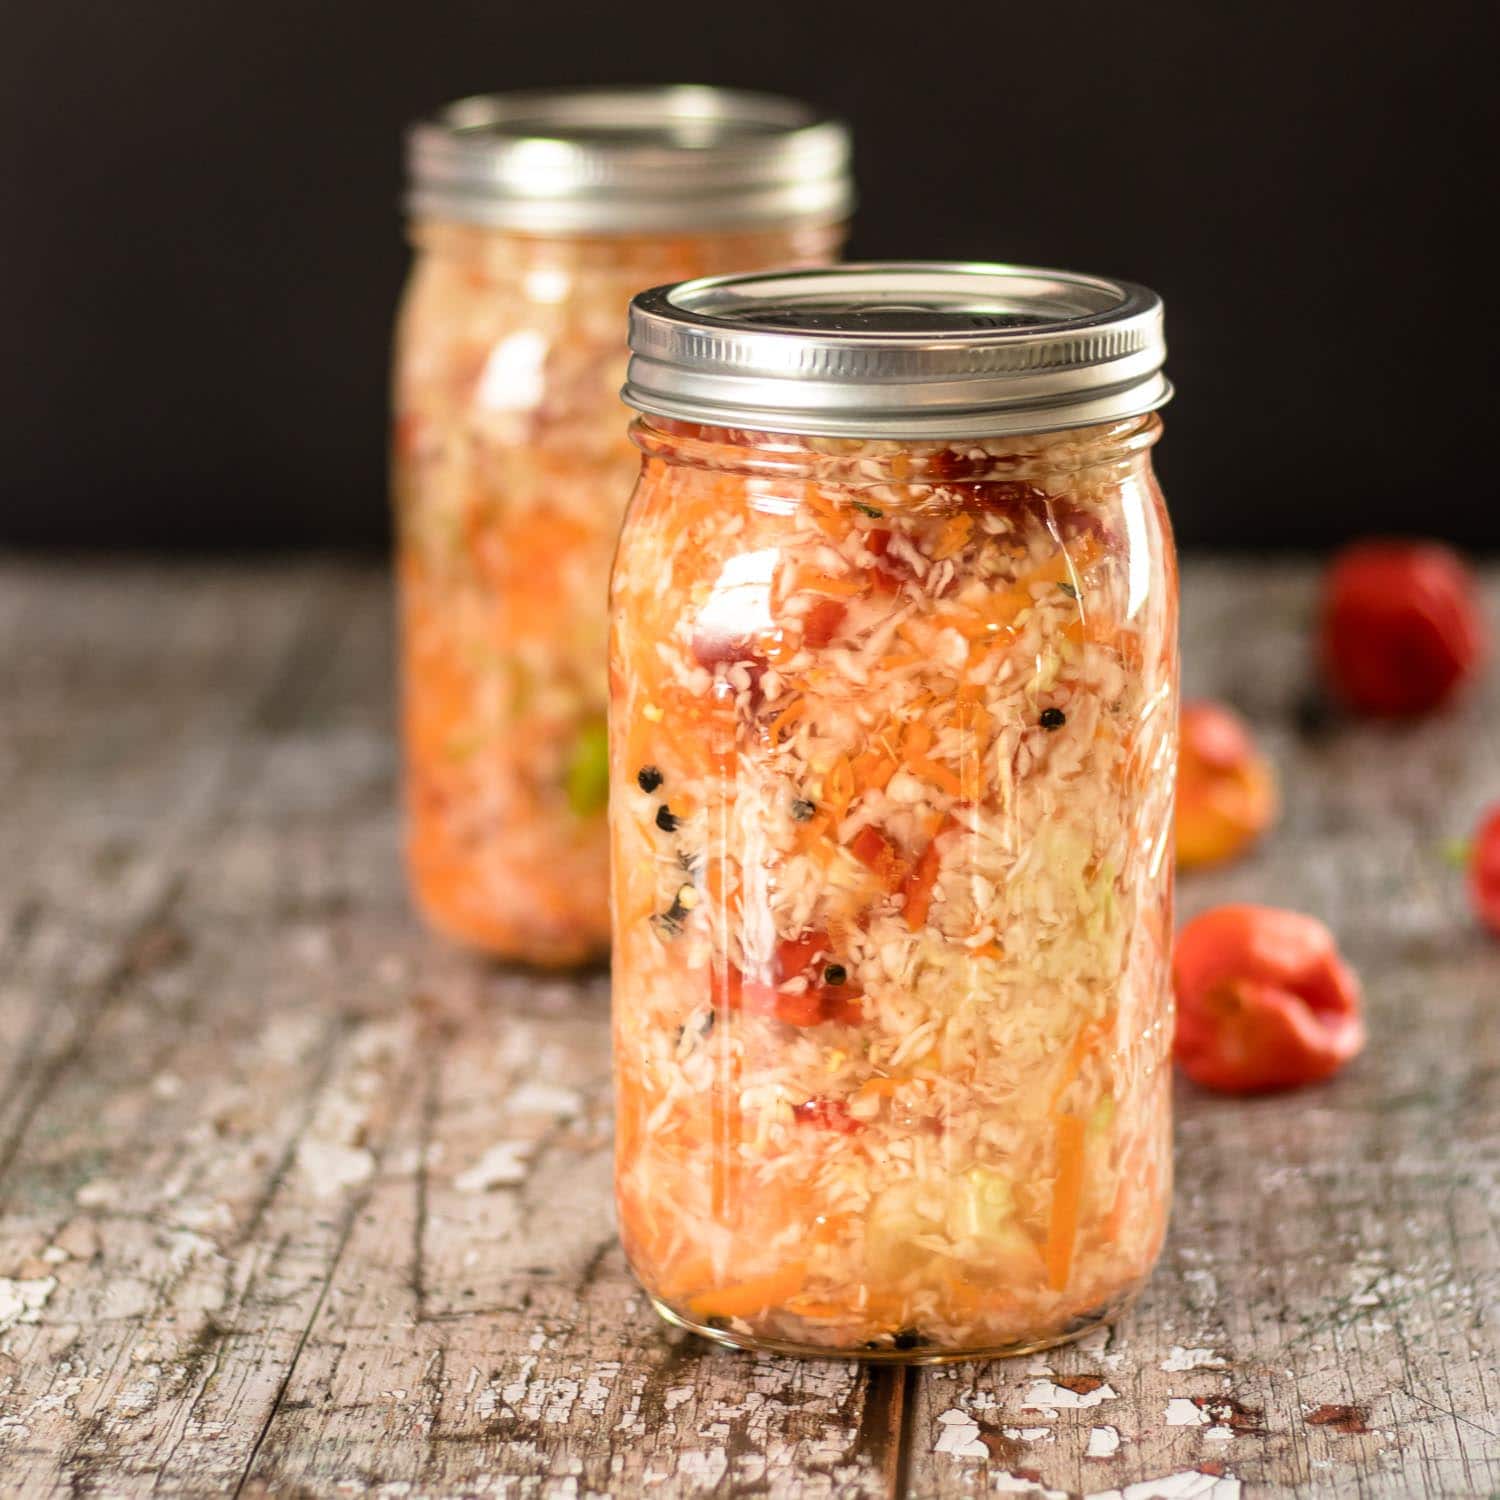 Haitian Pikliz recipe in Mason Jars with Scotch Bonnet peppers in the background